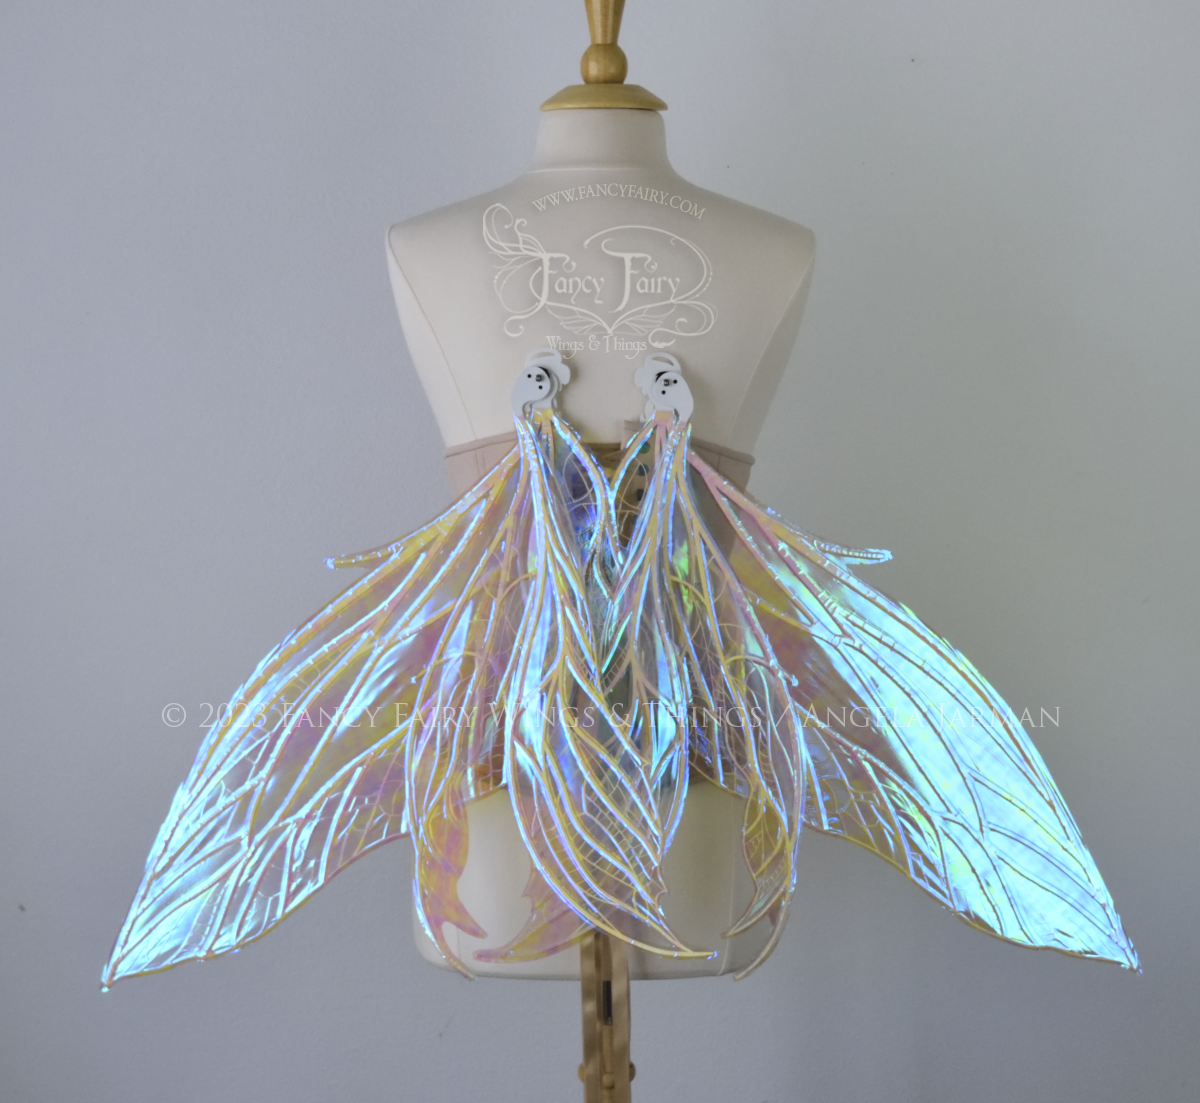 Back view of an ivory dress form wearing an underbust corset and large blue/teal/violet iridescent fairy wings, in the resting position angled downward. Upper panels are elongated with pointed tips, 2 lower panels curve downward, detailed white veins 